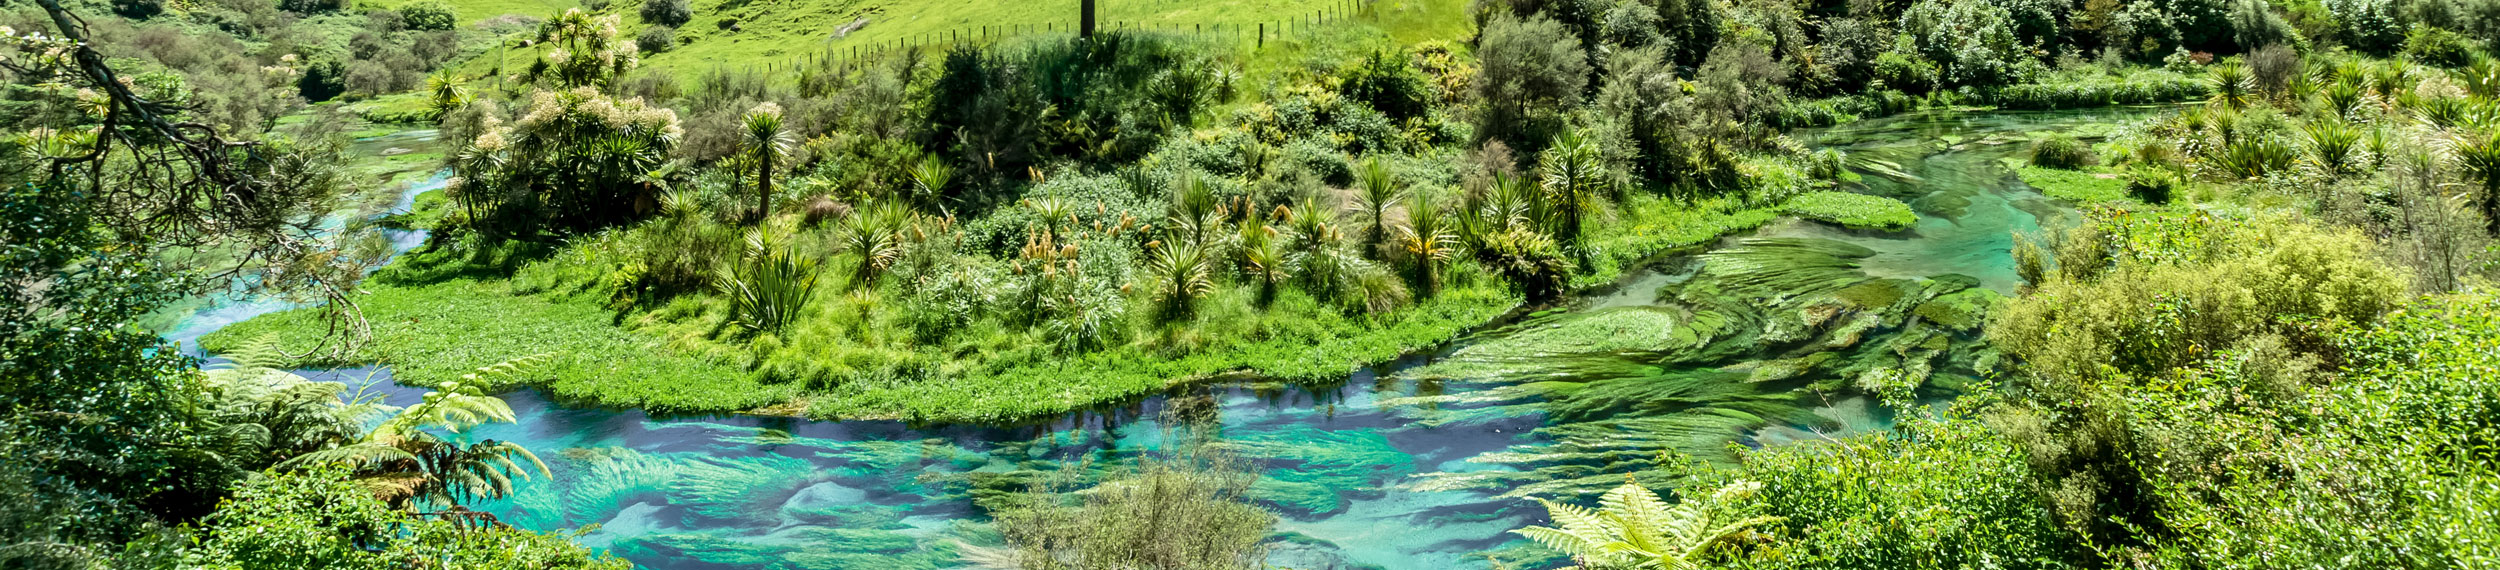 Lush green landscape and blue springs at Te Waihou Walkway in Hamilton, New Zealand.